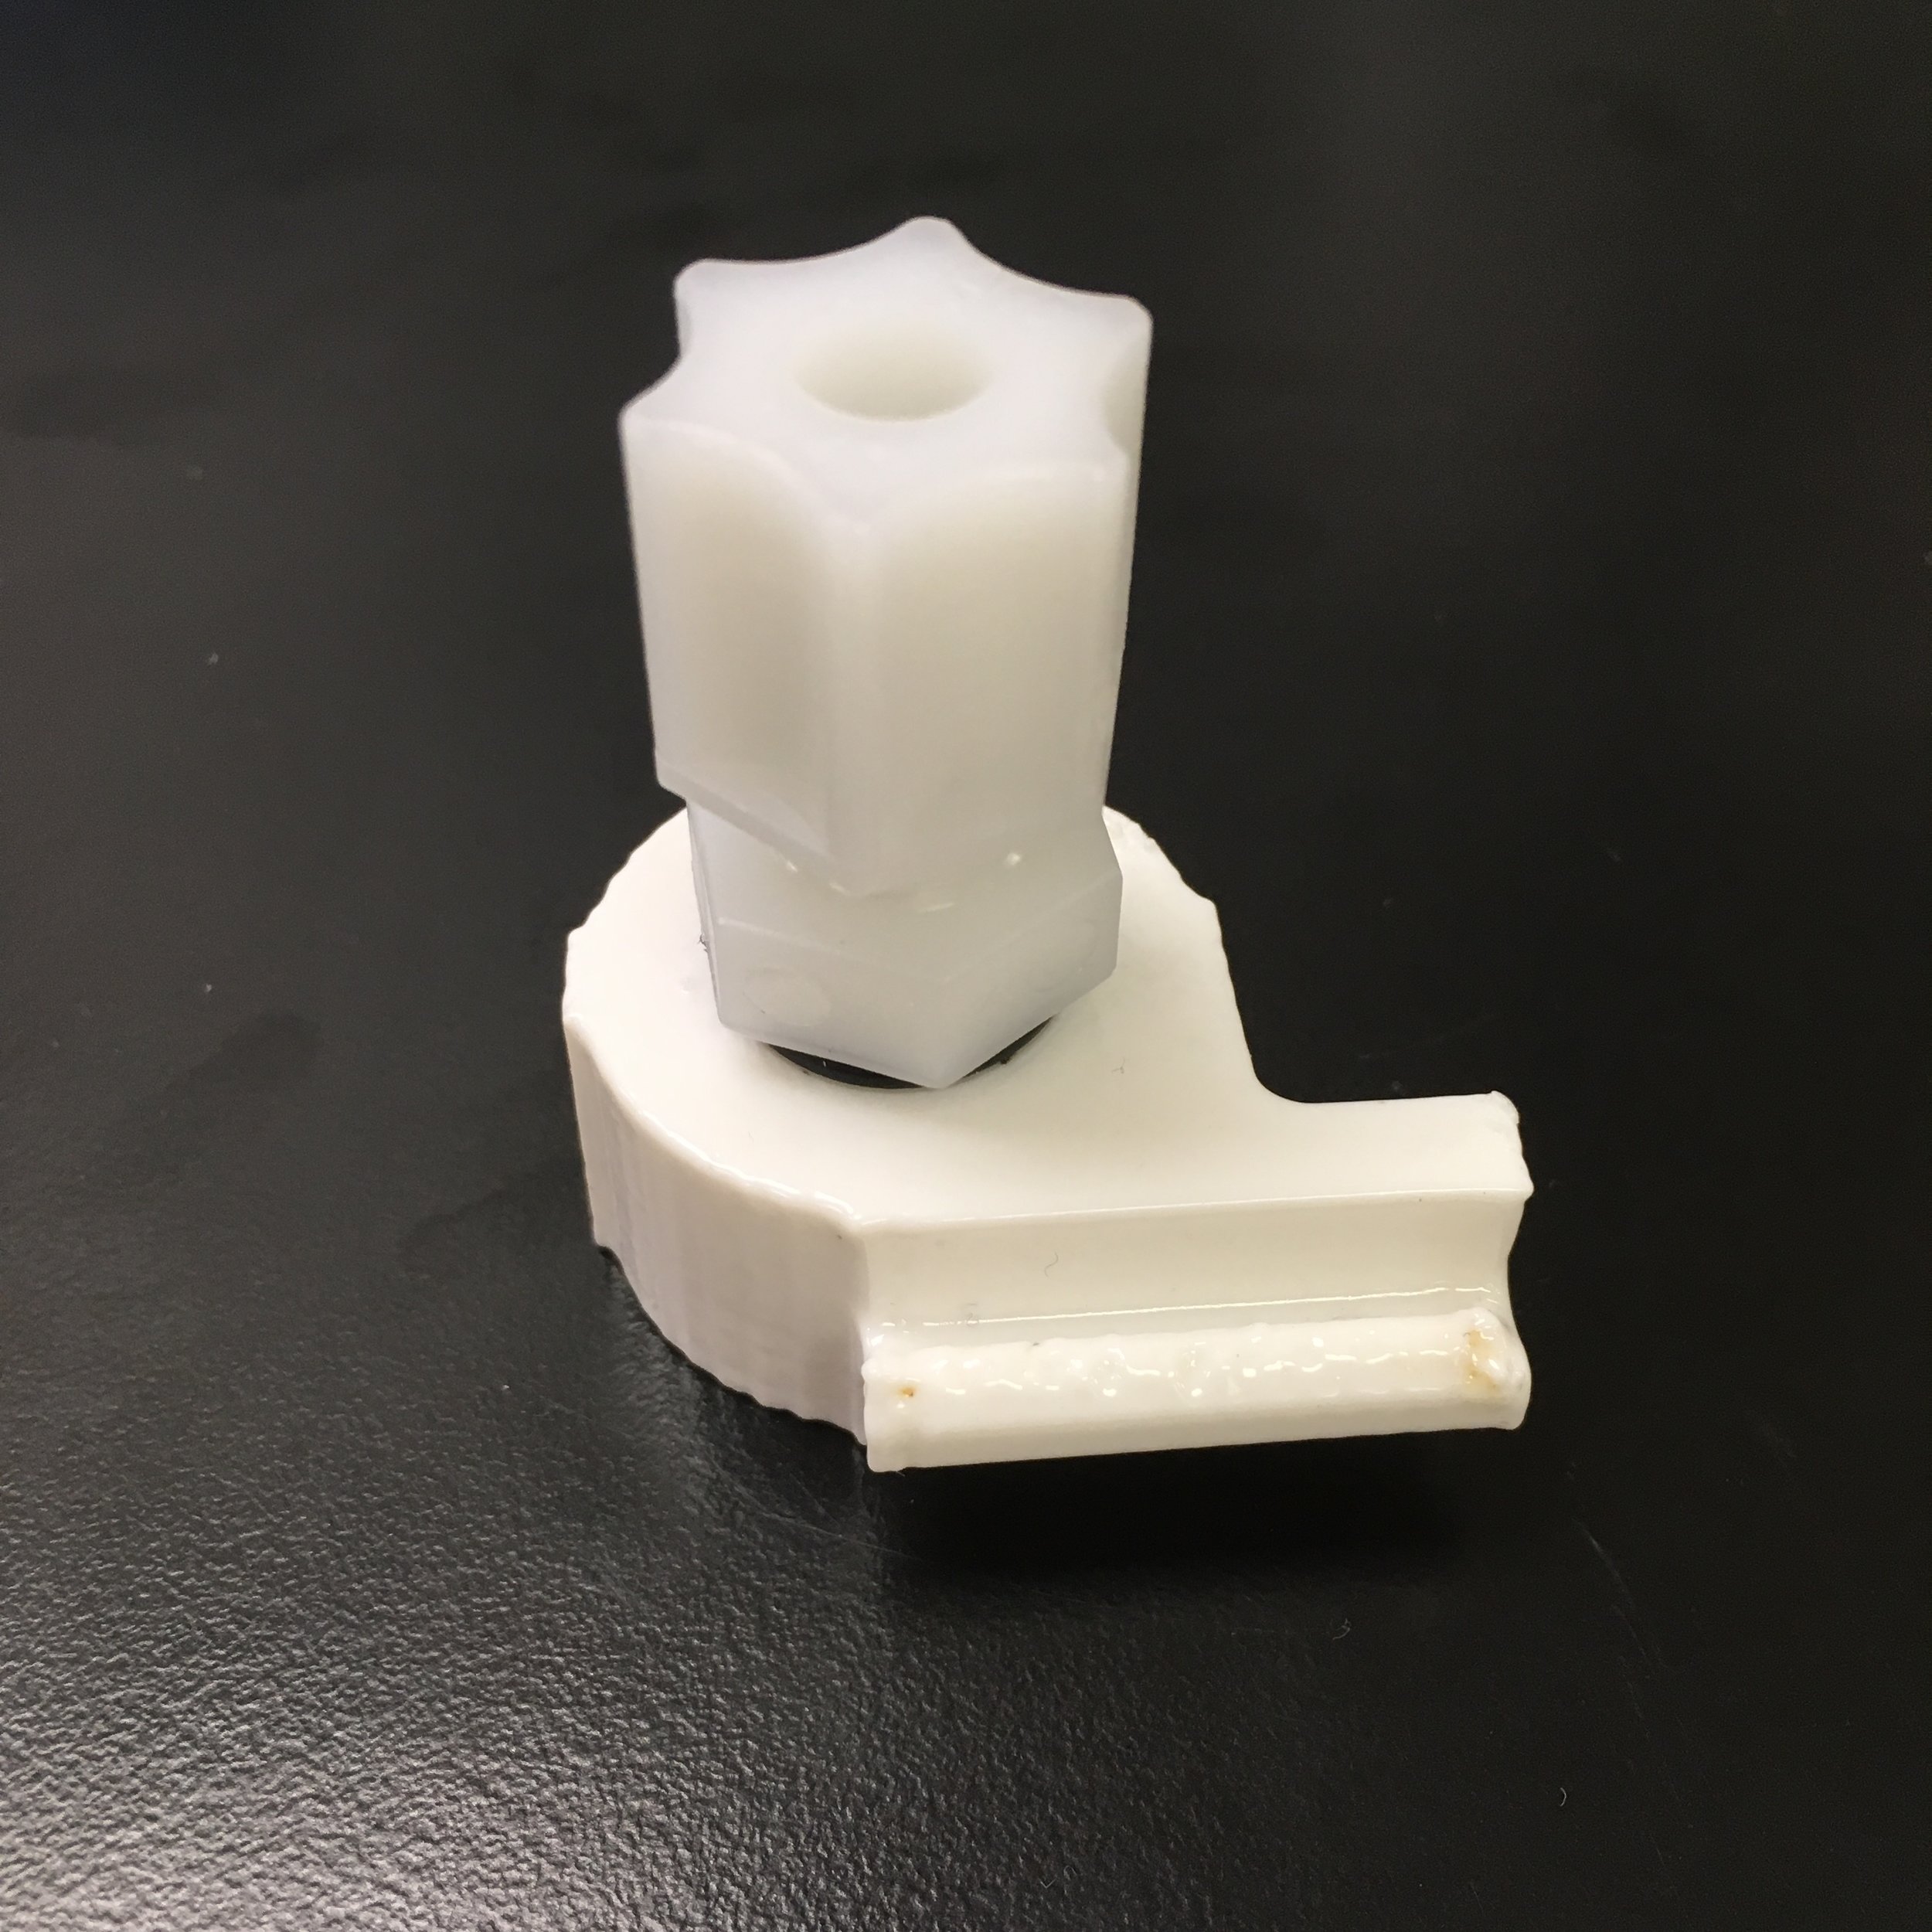 An FDM Printed Bag Cap with an NPT x Compression Fitting attached. It has been post-processed with acetone vapor to smooth the outer surface.